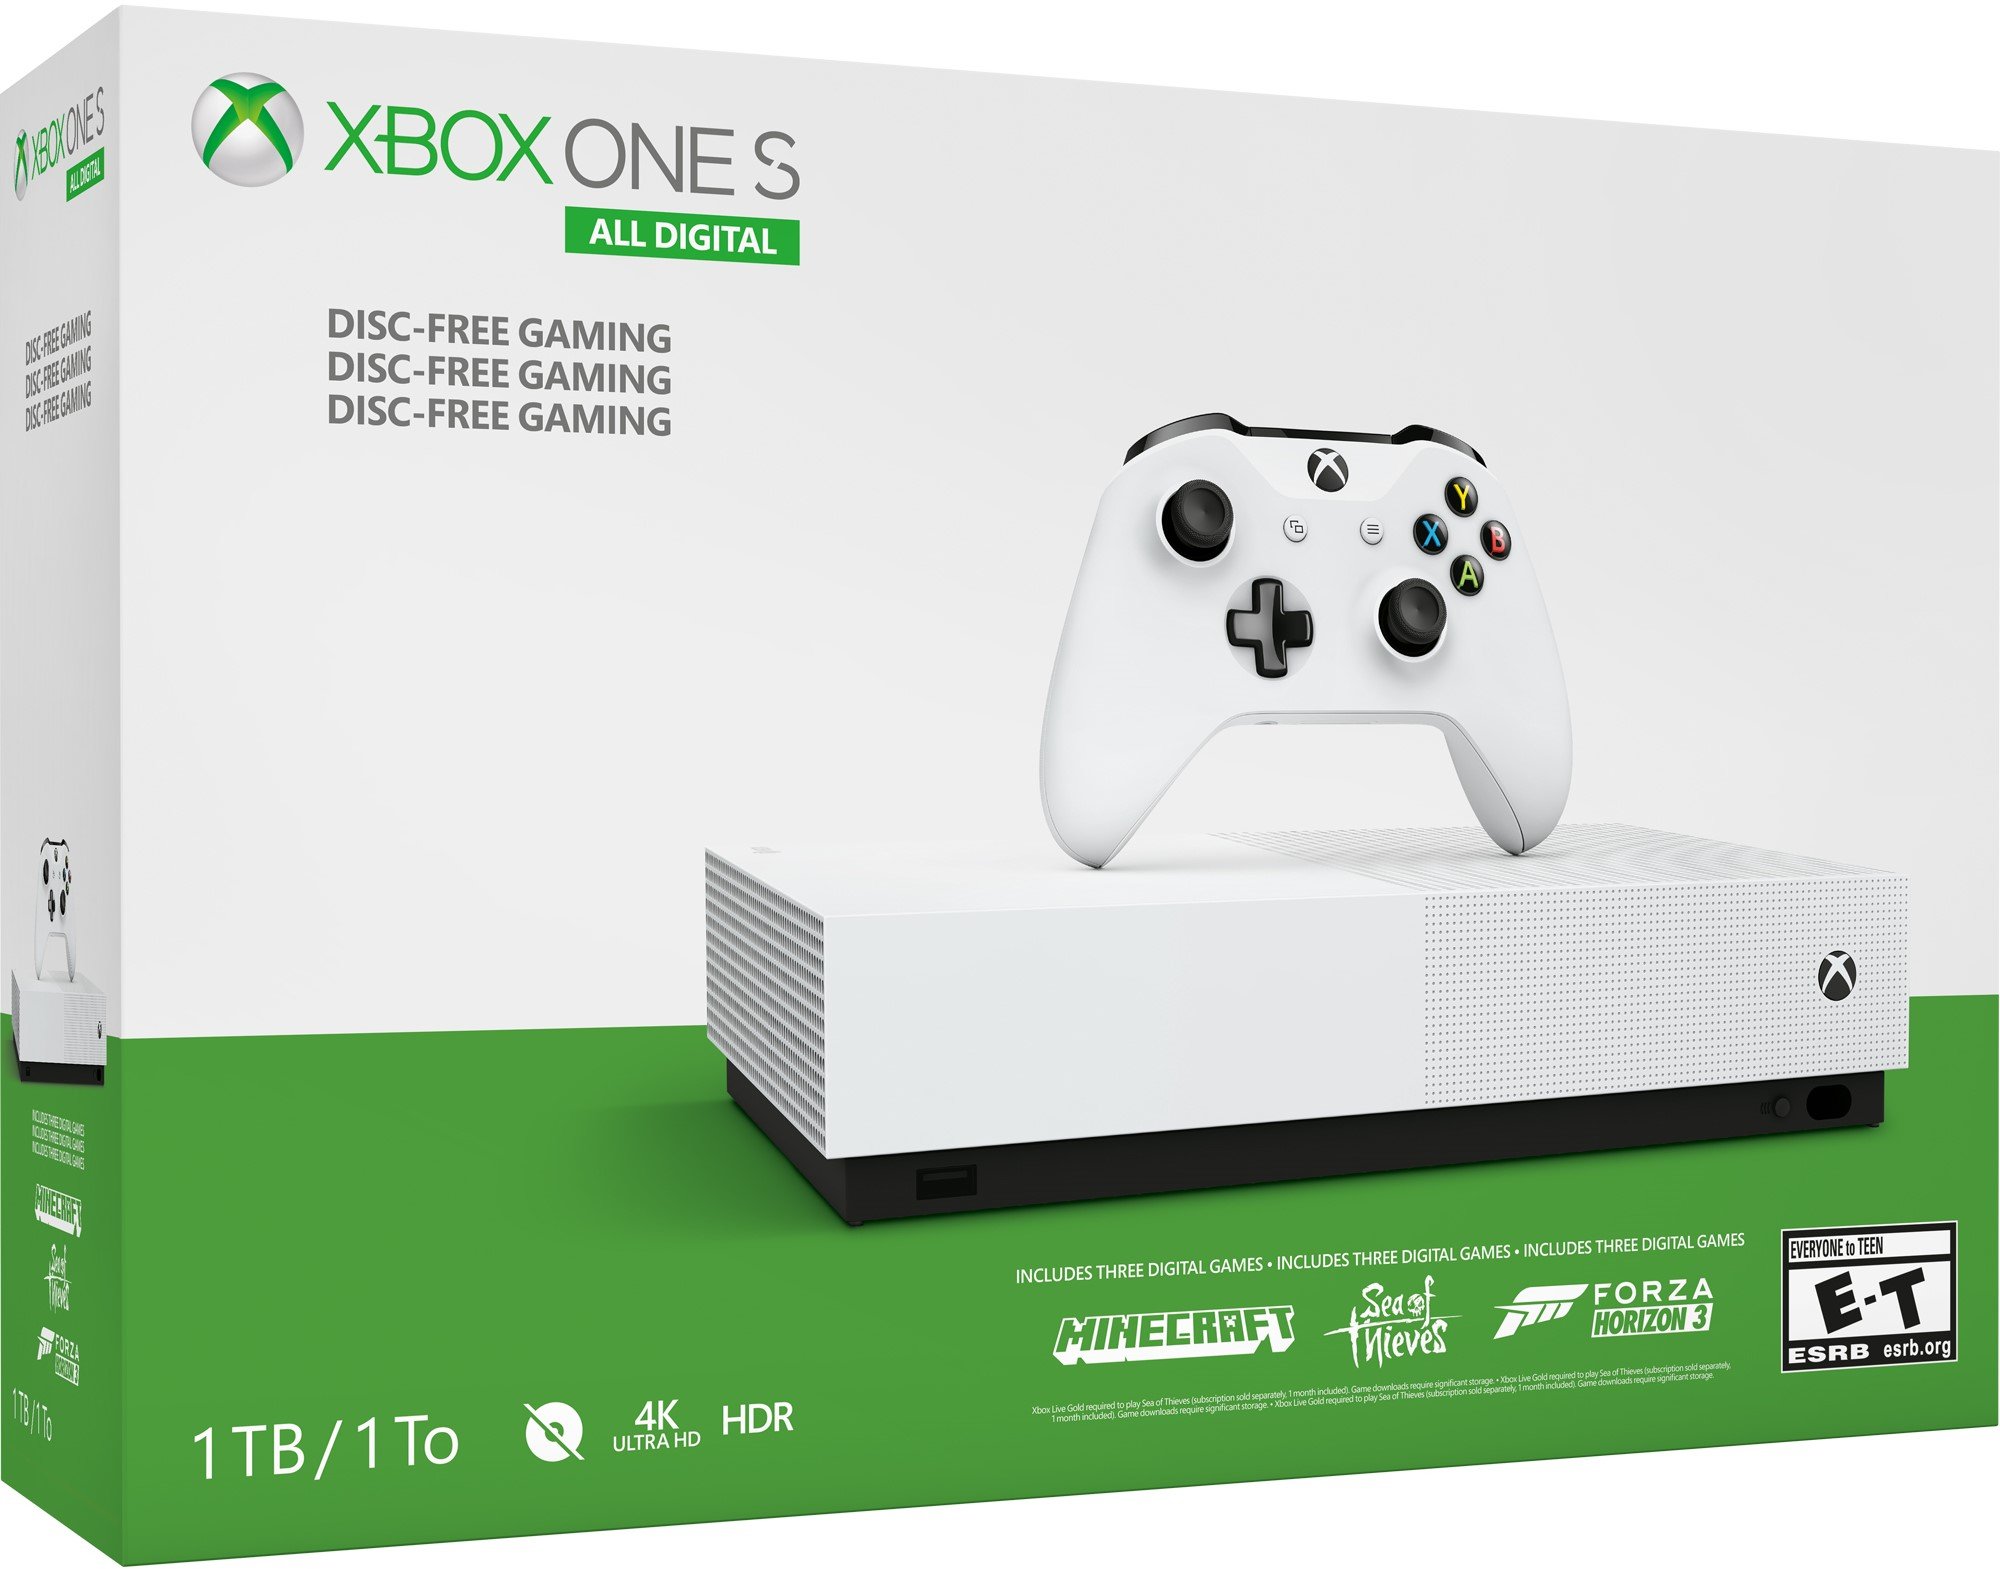 https://www.windowscentral.com/sites/wpcentral.com/files/field/image/2019/04/xbox-one-s-all-digital-box-3d.jpg?itok=Glkwh1Zv